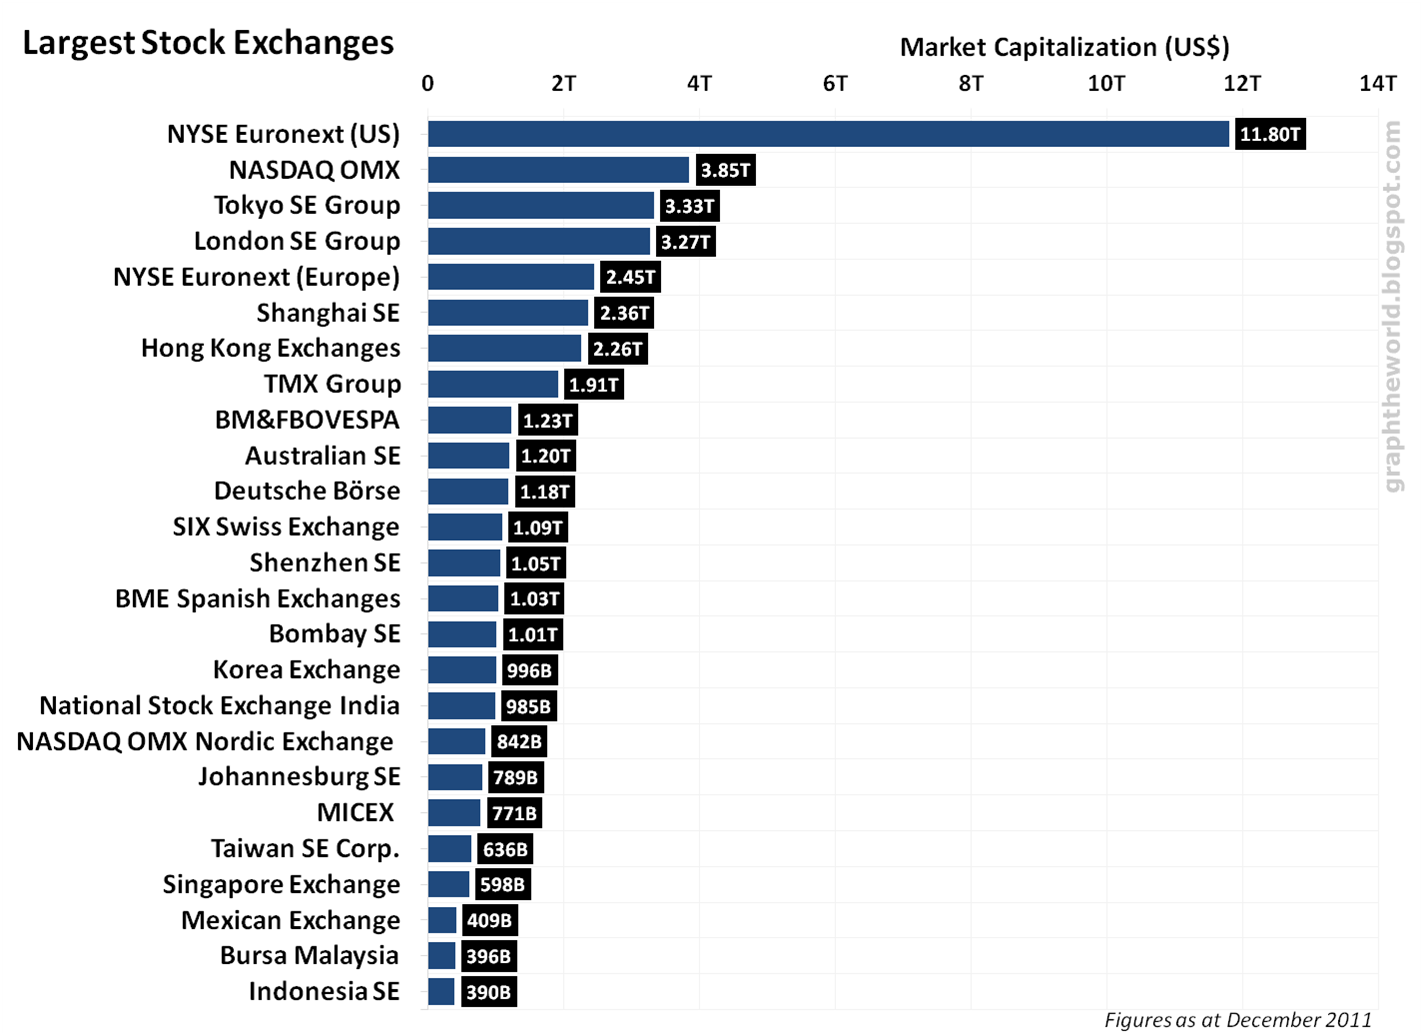 worlds largest stock exchange by market capitalization